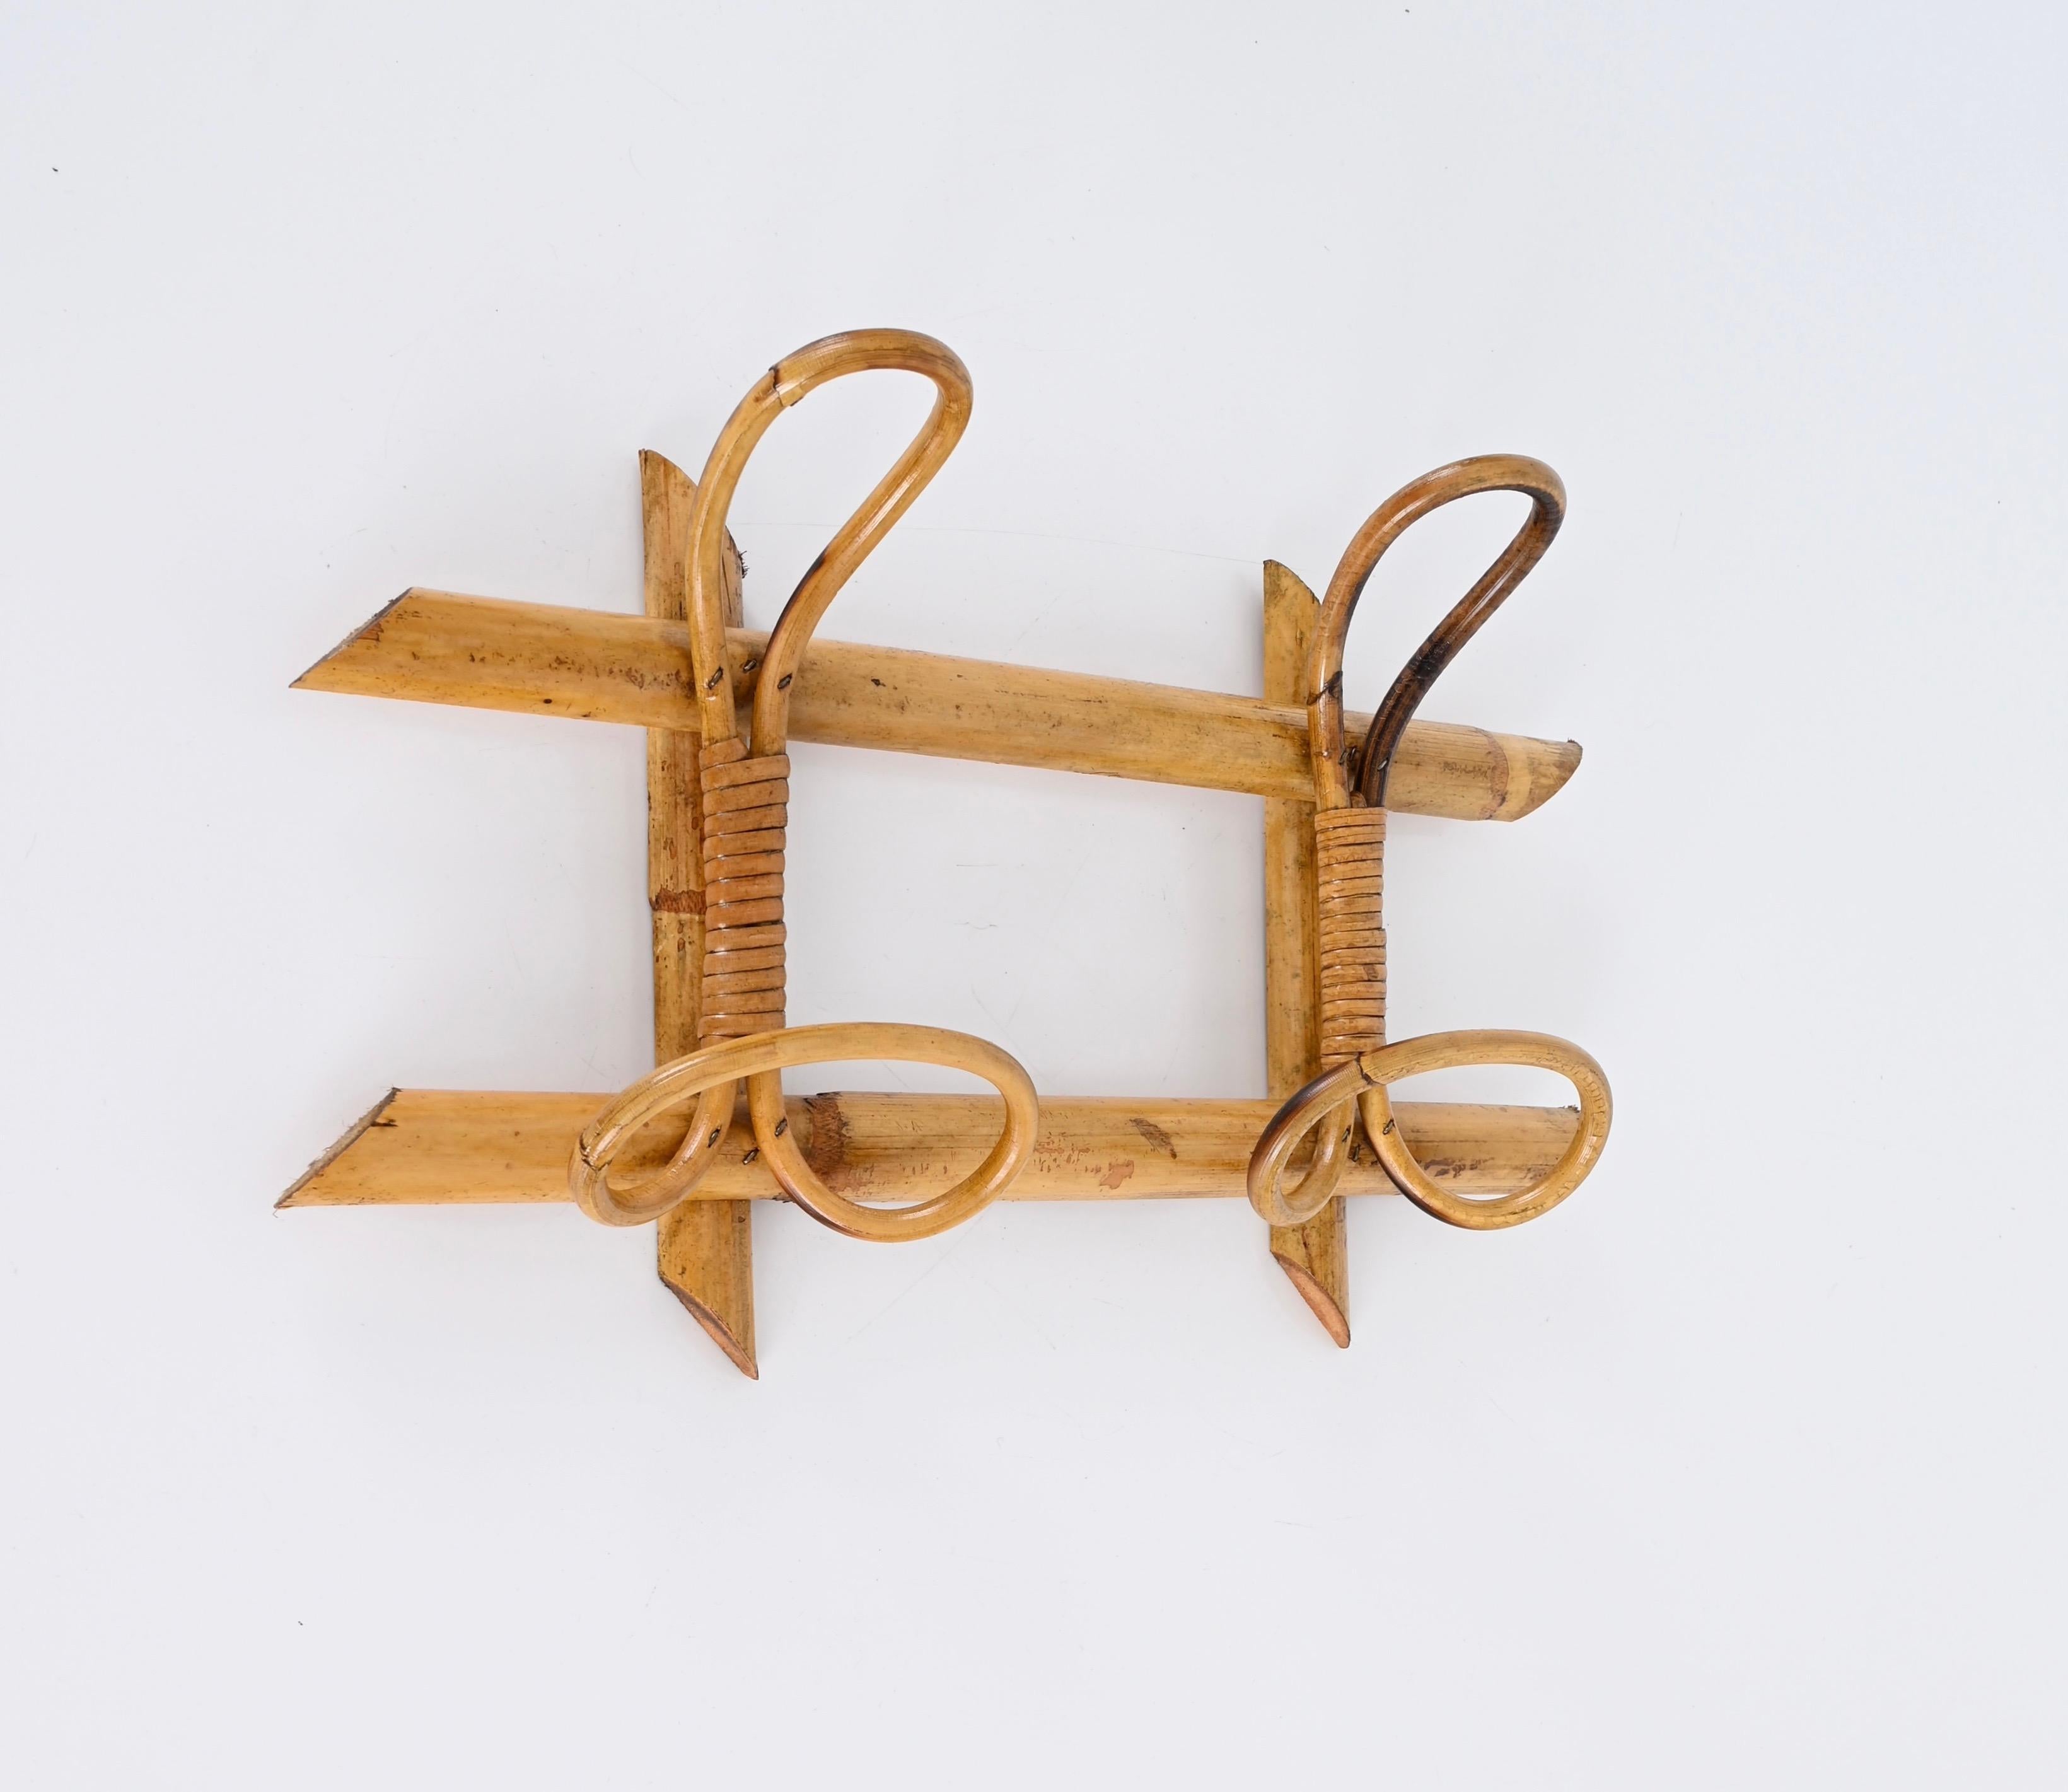 Midcentury French Riviera Coat Rack in Rattan, Wicker and Bamboo, Italy 1960s For Sale 2